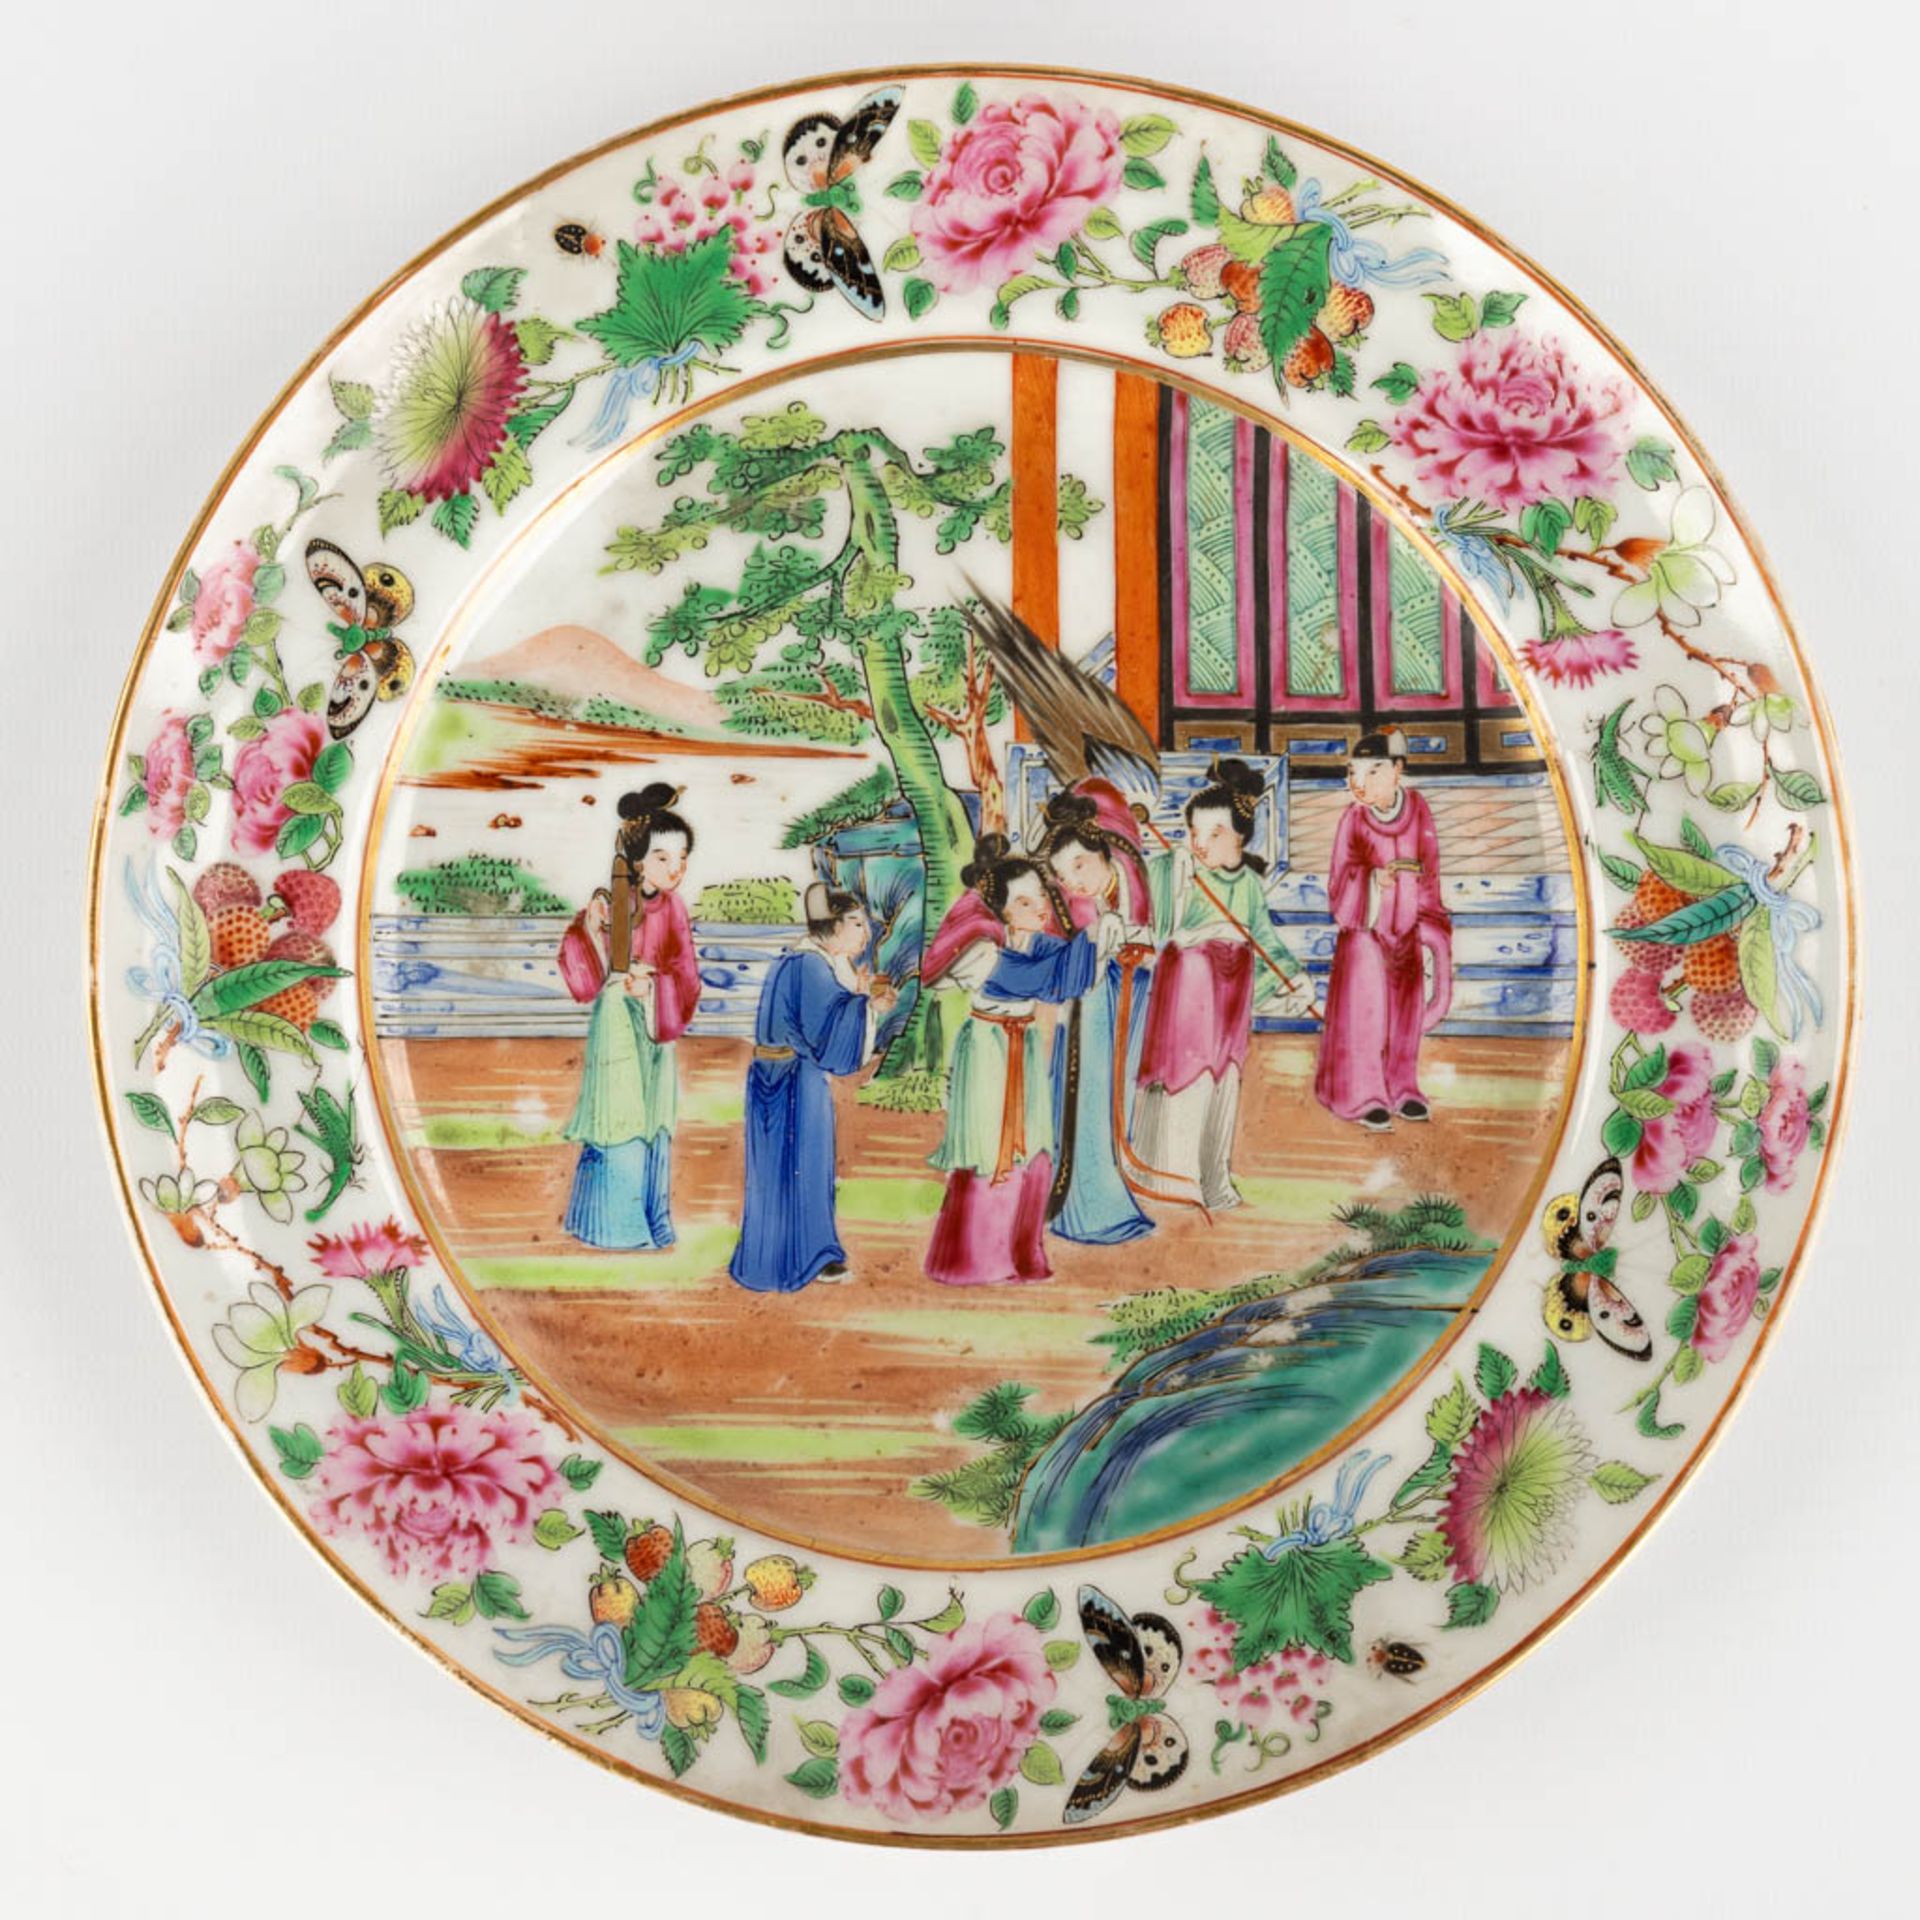 A Chinese Vase and 4 Canton plates, decorated with figurines. 19th/20th C. (H:42 x D:20 cm) - Image 17 of 23